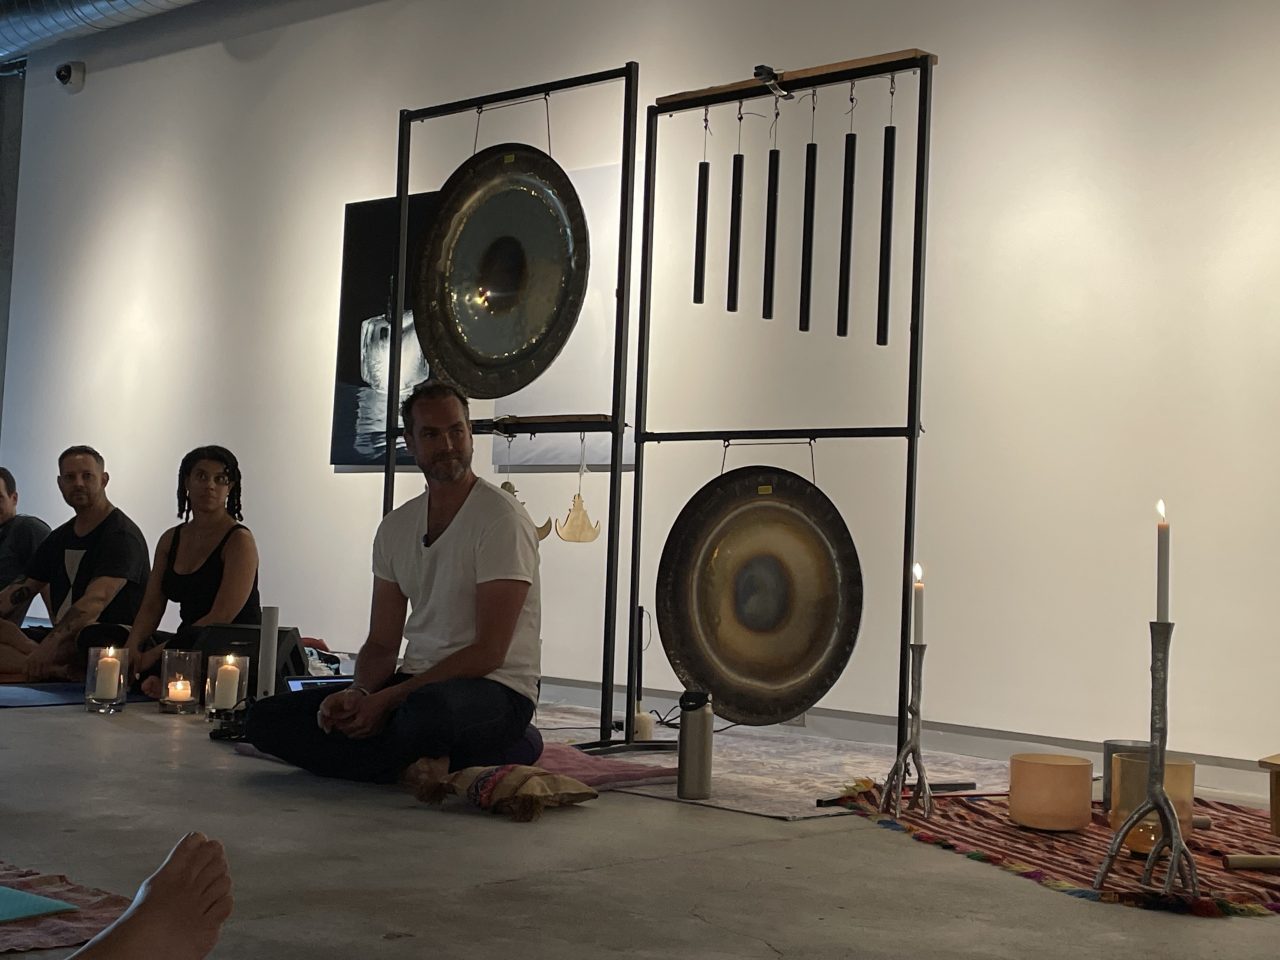 People sit on the floor by several hanging percussion instruments as part of the Sound Bath Experiences installation on the Karl Stirner Arts Trail in Easton, Pennsylvania